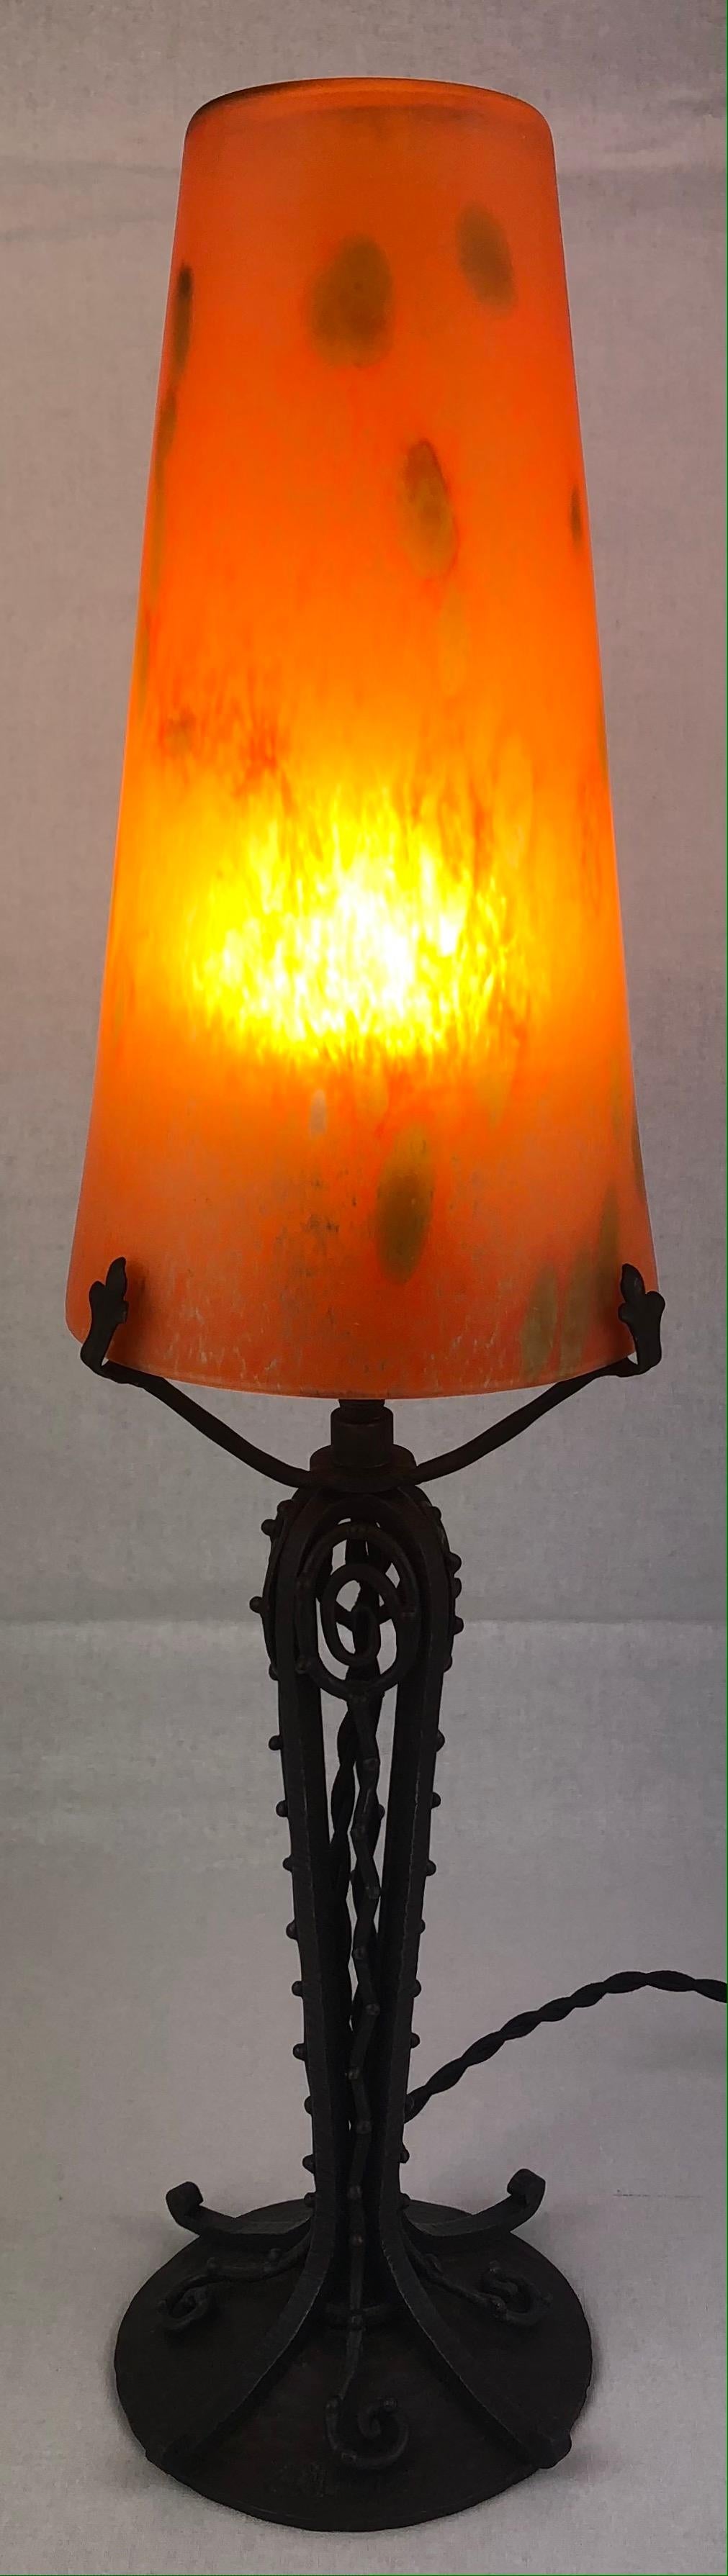 A fine art deco wrought iron lamp designed by Louis Trichard featuring a beautiful pate de verre shade in the style of Muller Freres. The base is made in the style and quality of Edgar Brandt. 

This exquisite table or desk lamp comes from the Louis